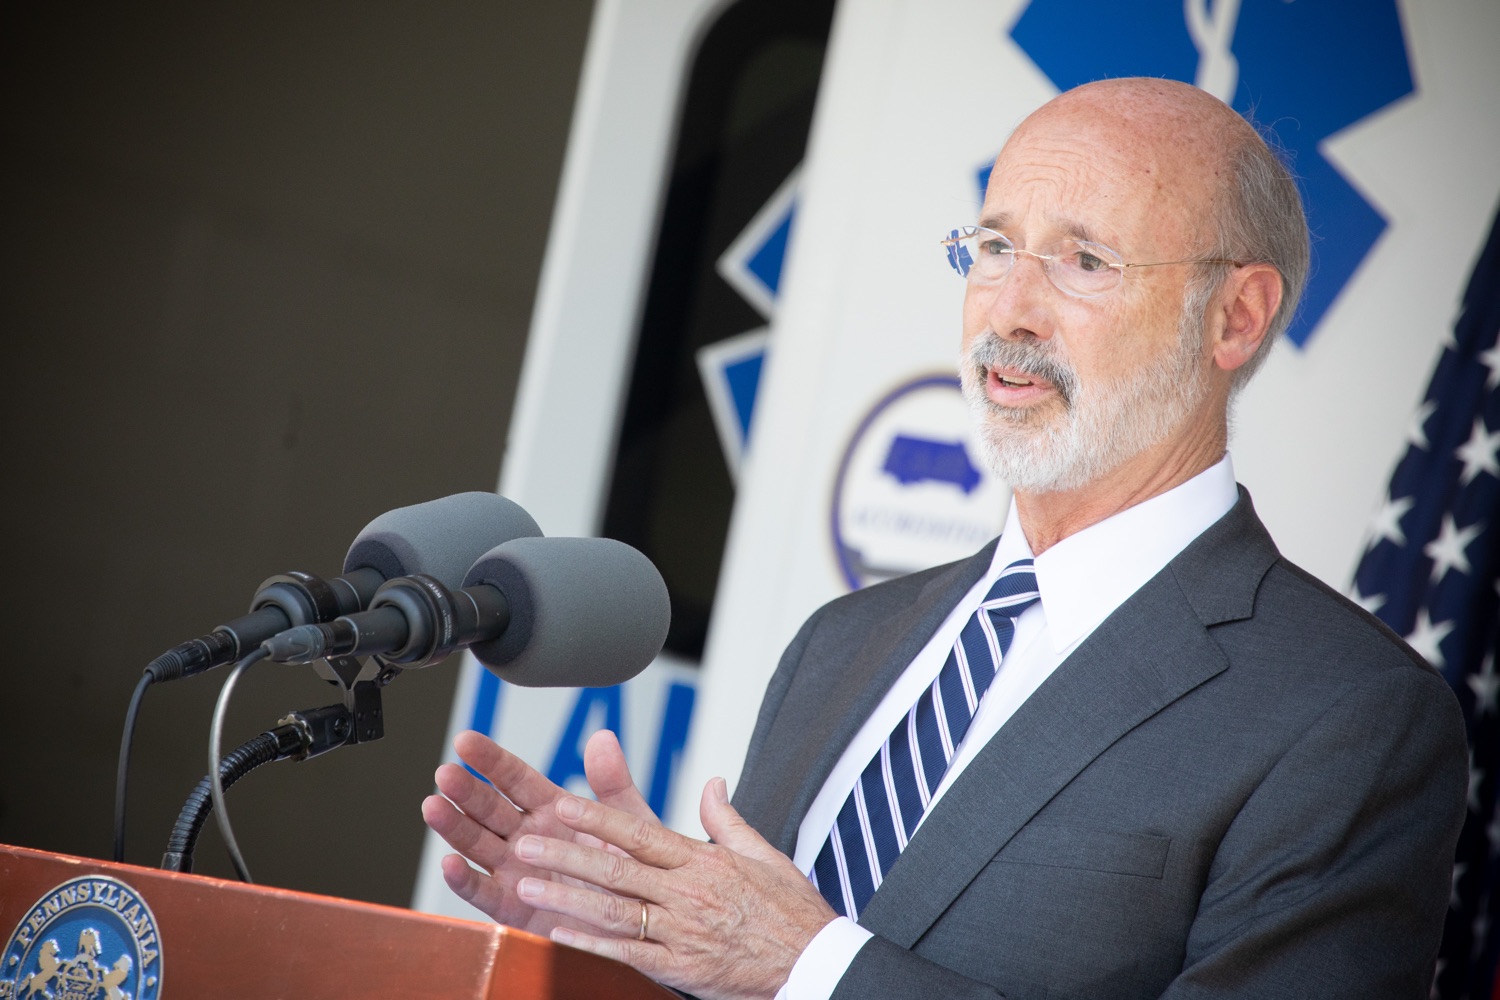 Pennsylvania Governor Tom Wolf speaking to the press. Governor Tom Wolf visited the Millersville location of Lancaster EMS today to thank first responders and learn about how they are adapting their critical work during the states response to the COVID-19 pandemic.  Millersville, PA  July 30, 2020<br><a href="https://filesource.amperwave.net/commonwealthofpa/photo/18180_gov_first_responders_dz_018.jpg" target="_blank">⇣ Download Photo</a>